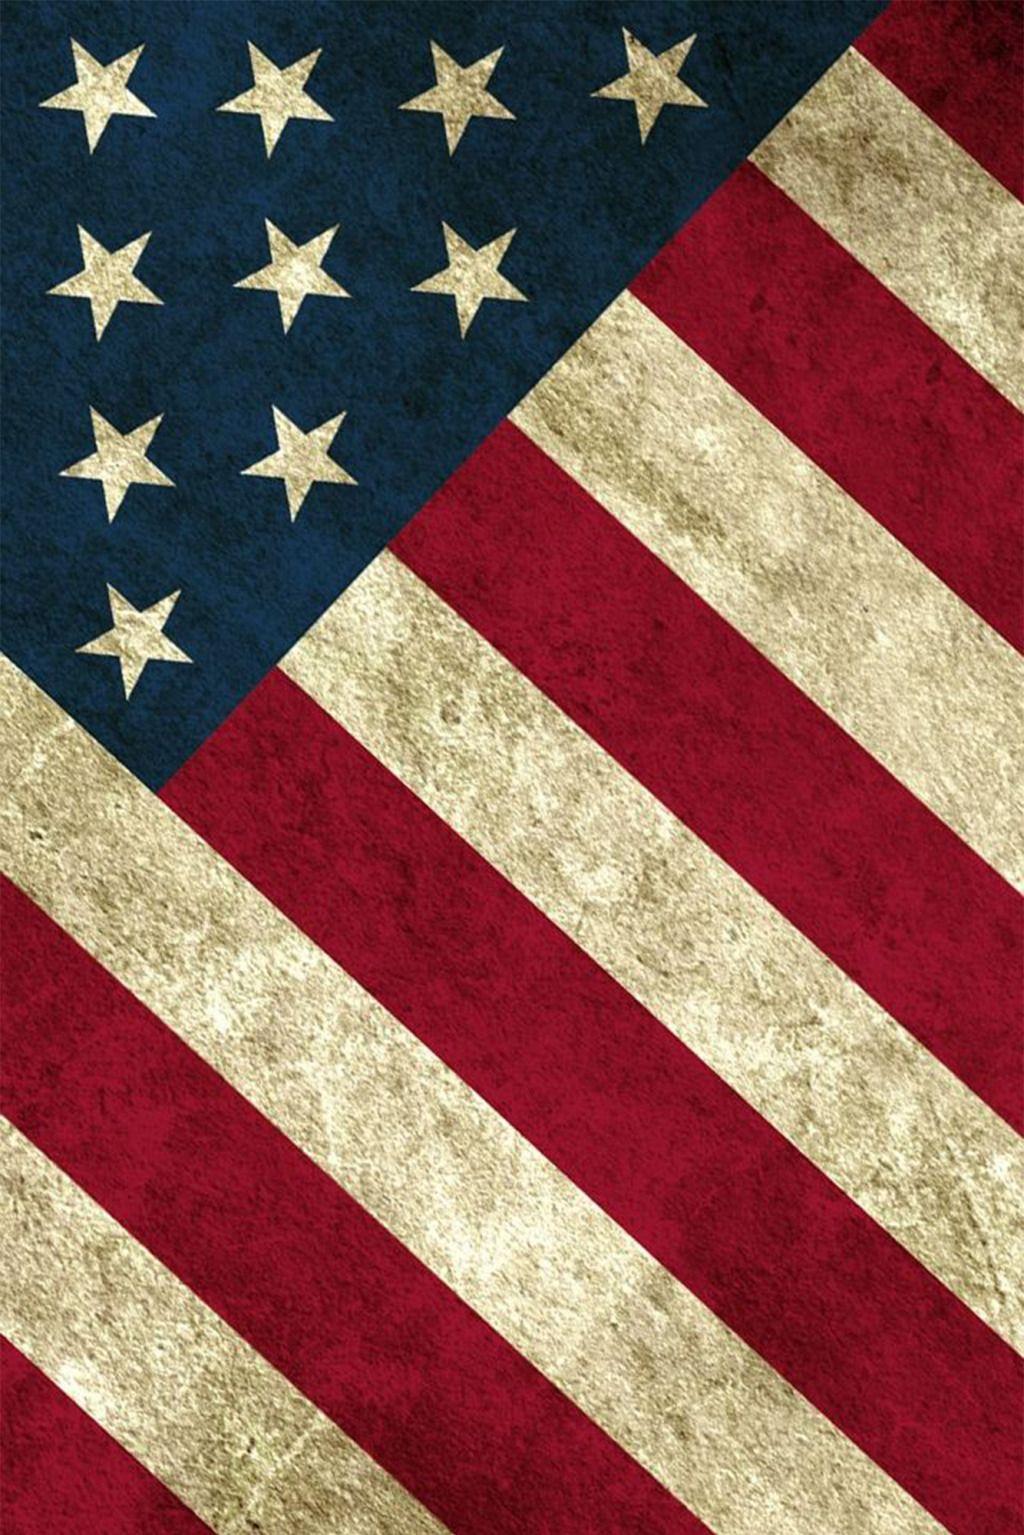 American Themed iPhone Wallpaper Free American Themed